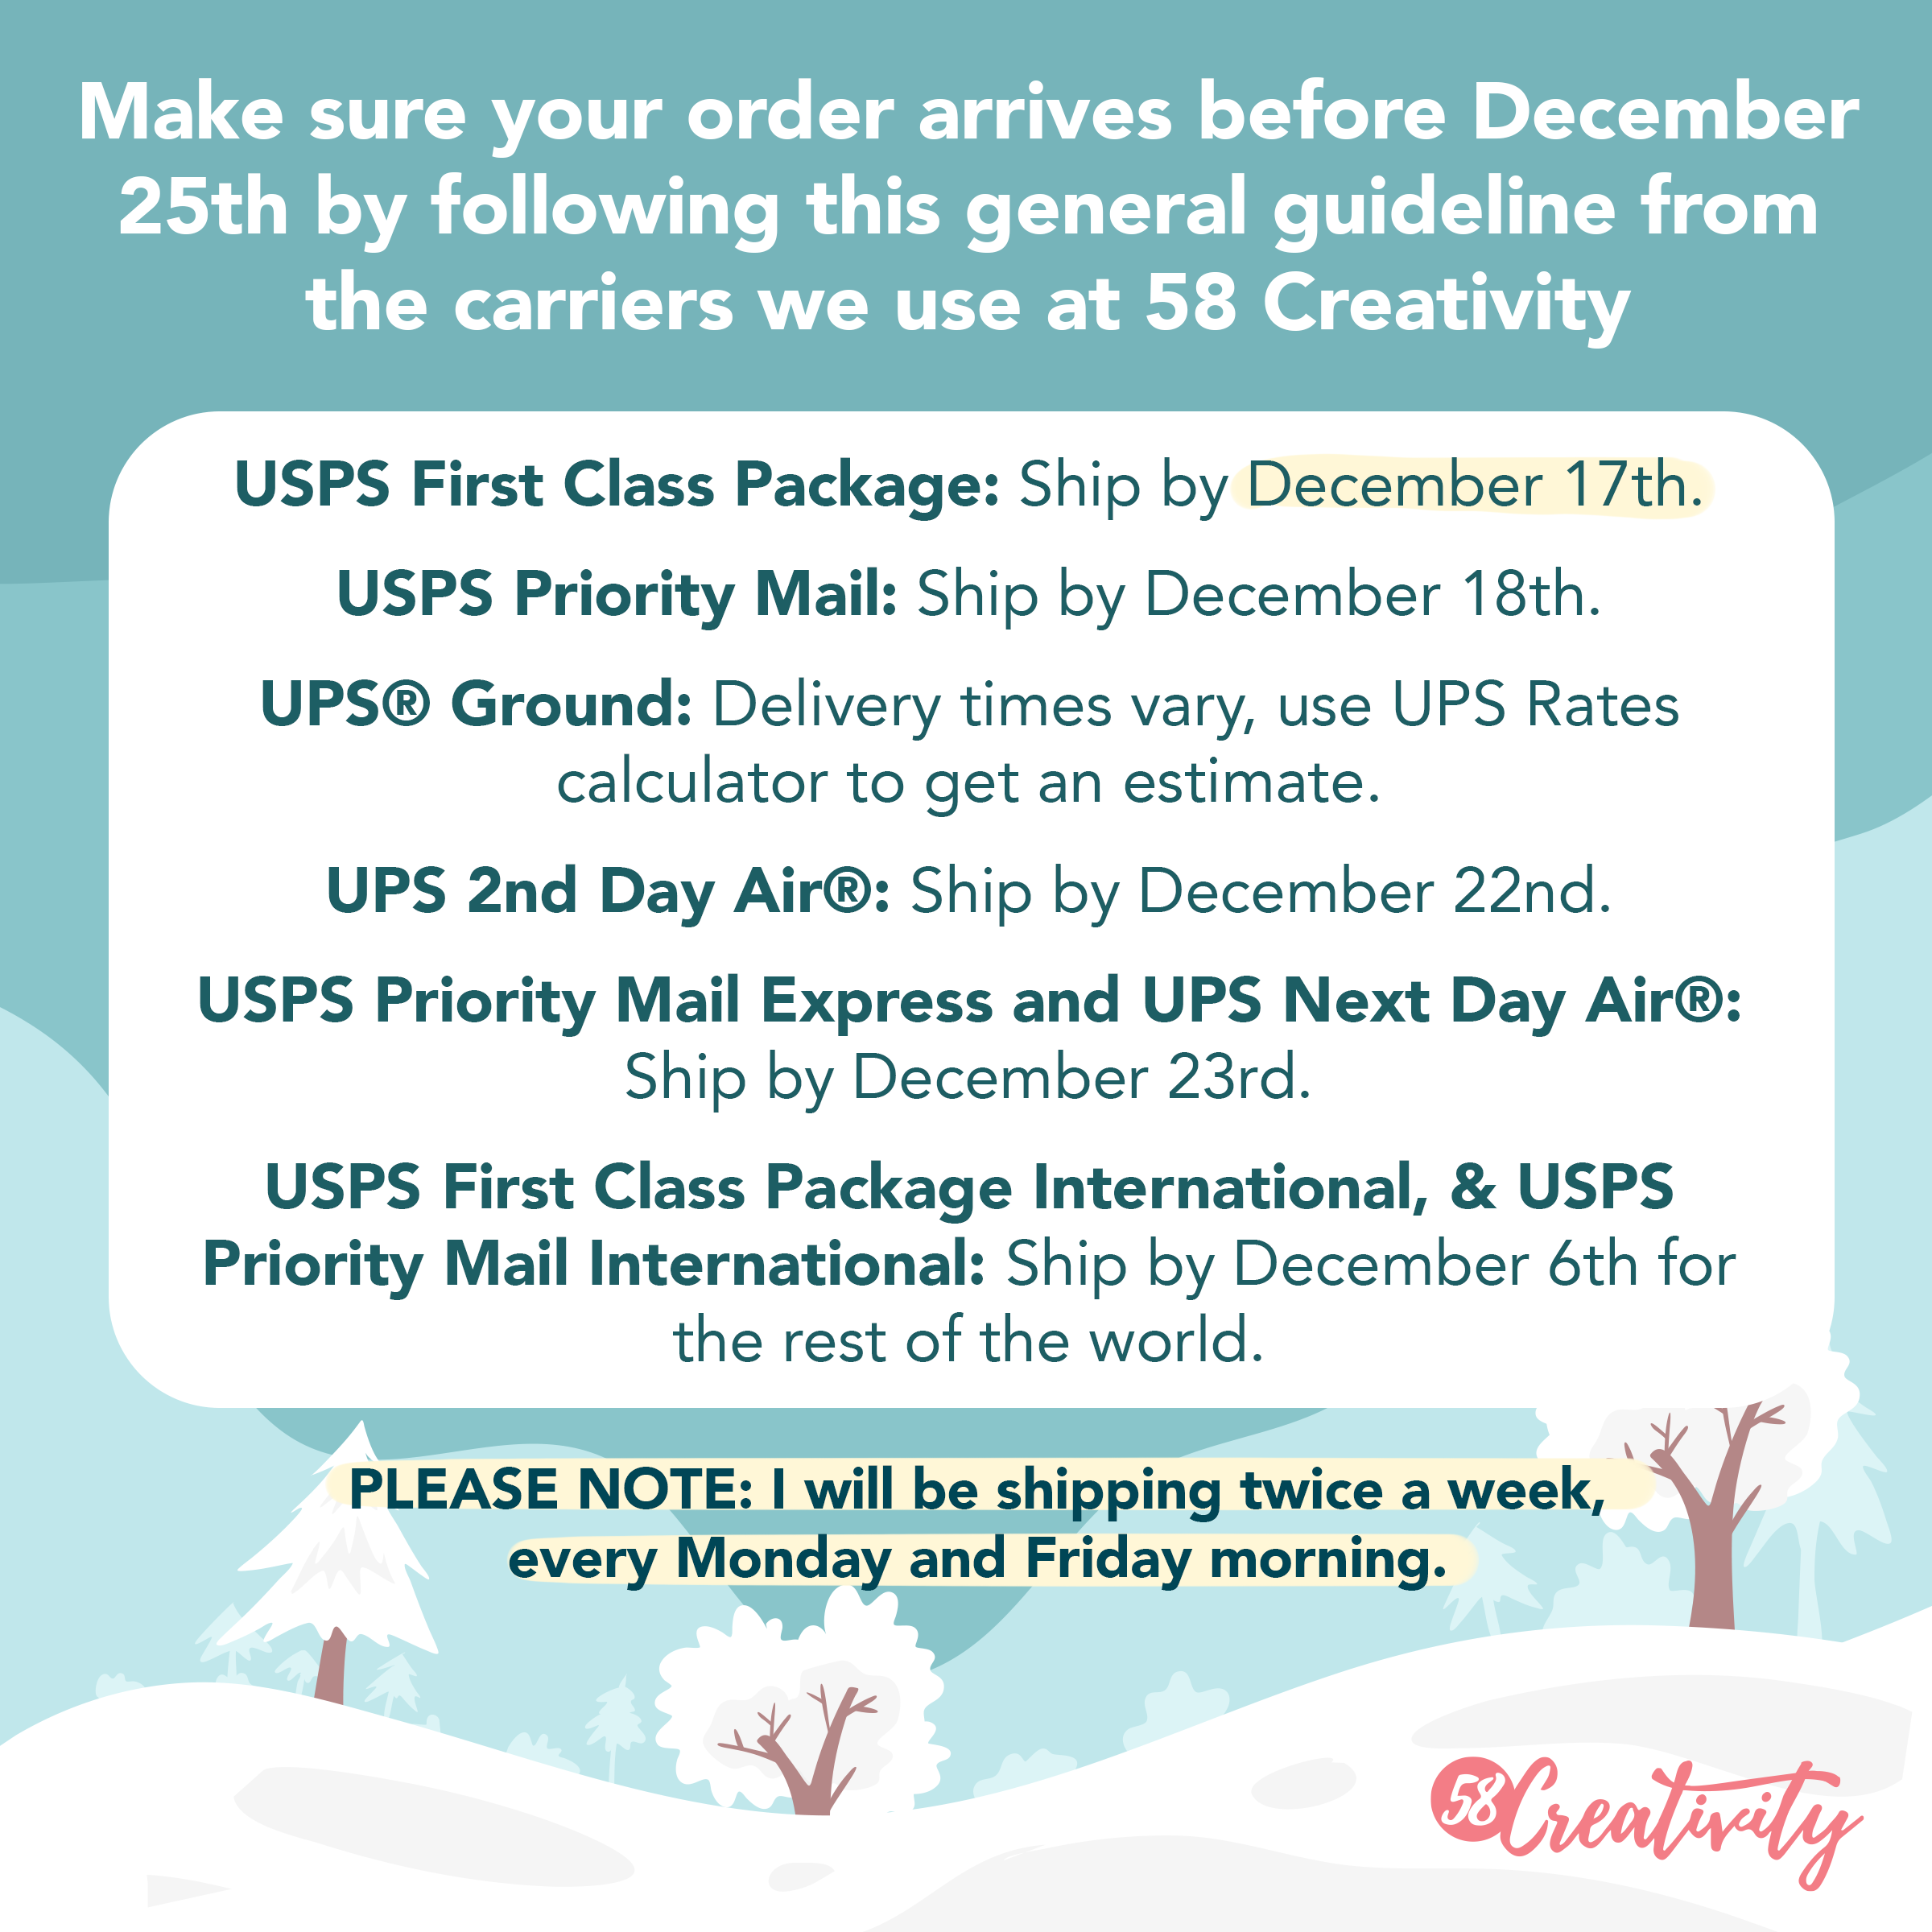 teenagere Menagerry Regelmæssigt Brittany Castle on Twitter: "Make sure your order arrives before Dec 25 by  following this general guideline from the carriers we use at 58 Creativity!  ❄️ Noted: I will be shipping twice